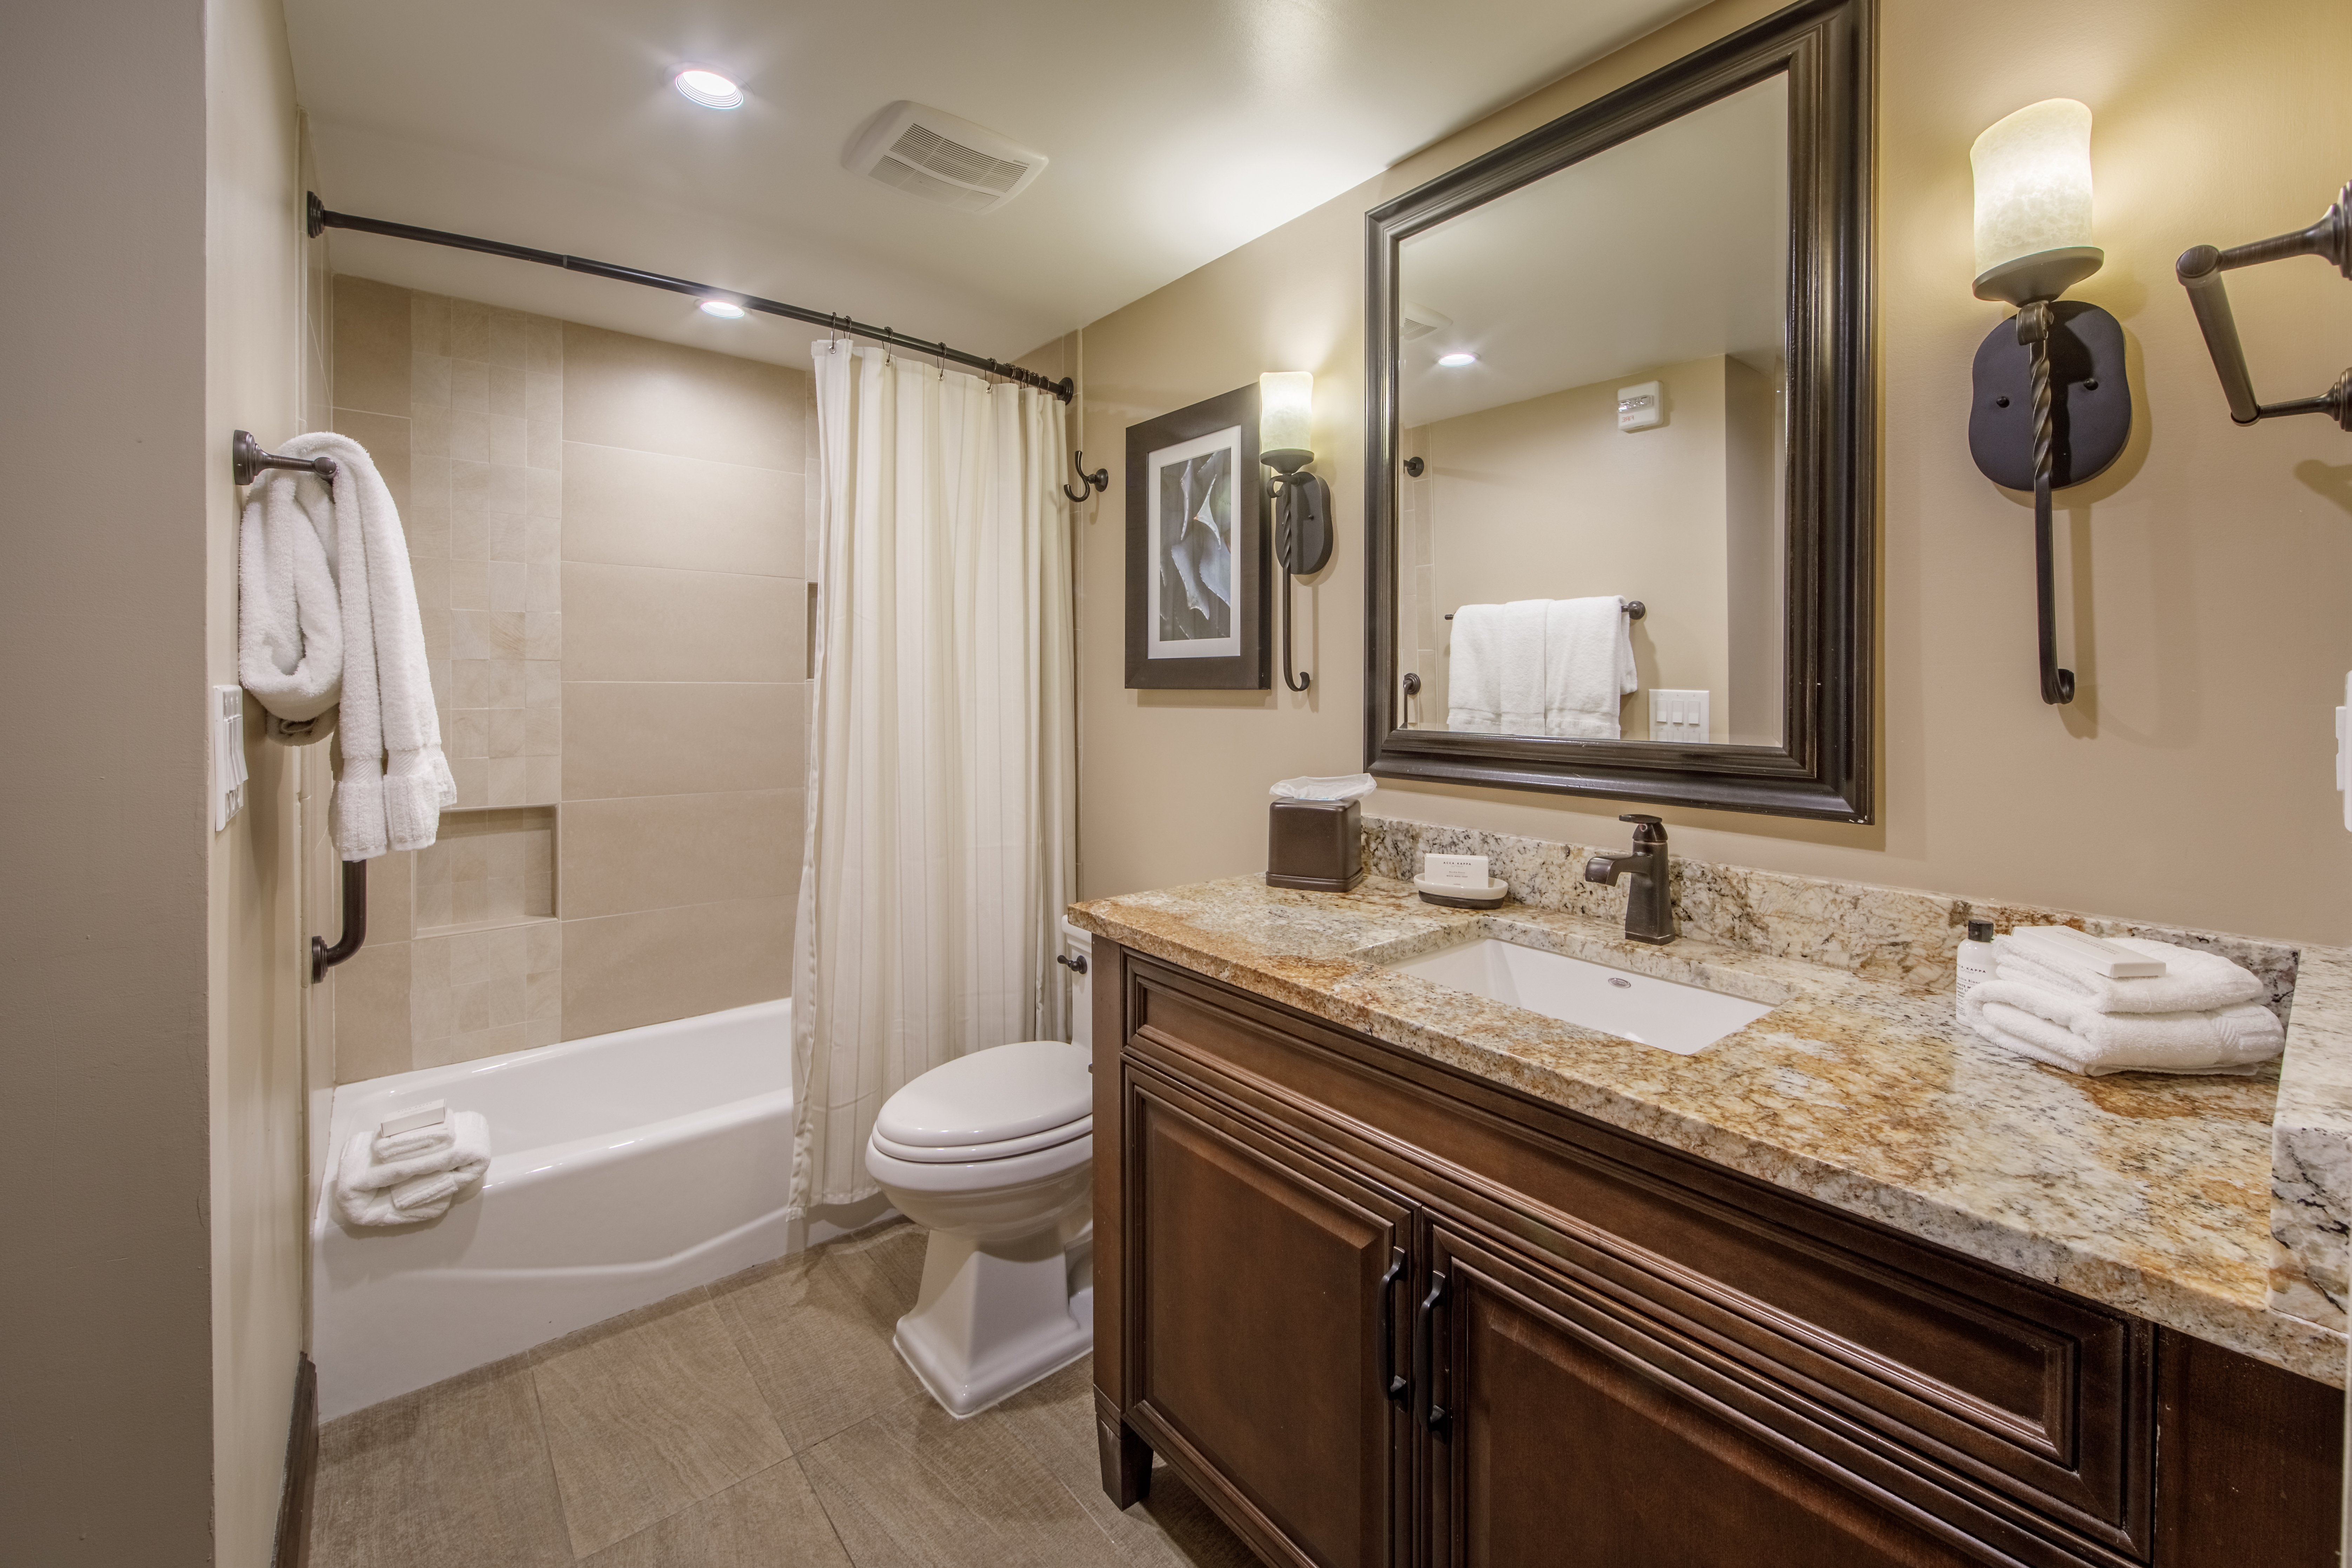 Signature collection bathrooms offer upgraded counter tops